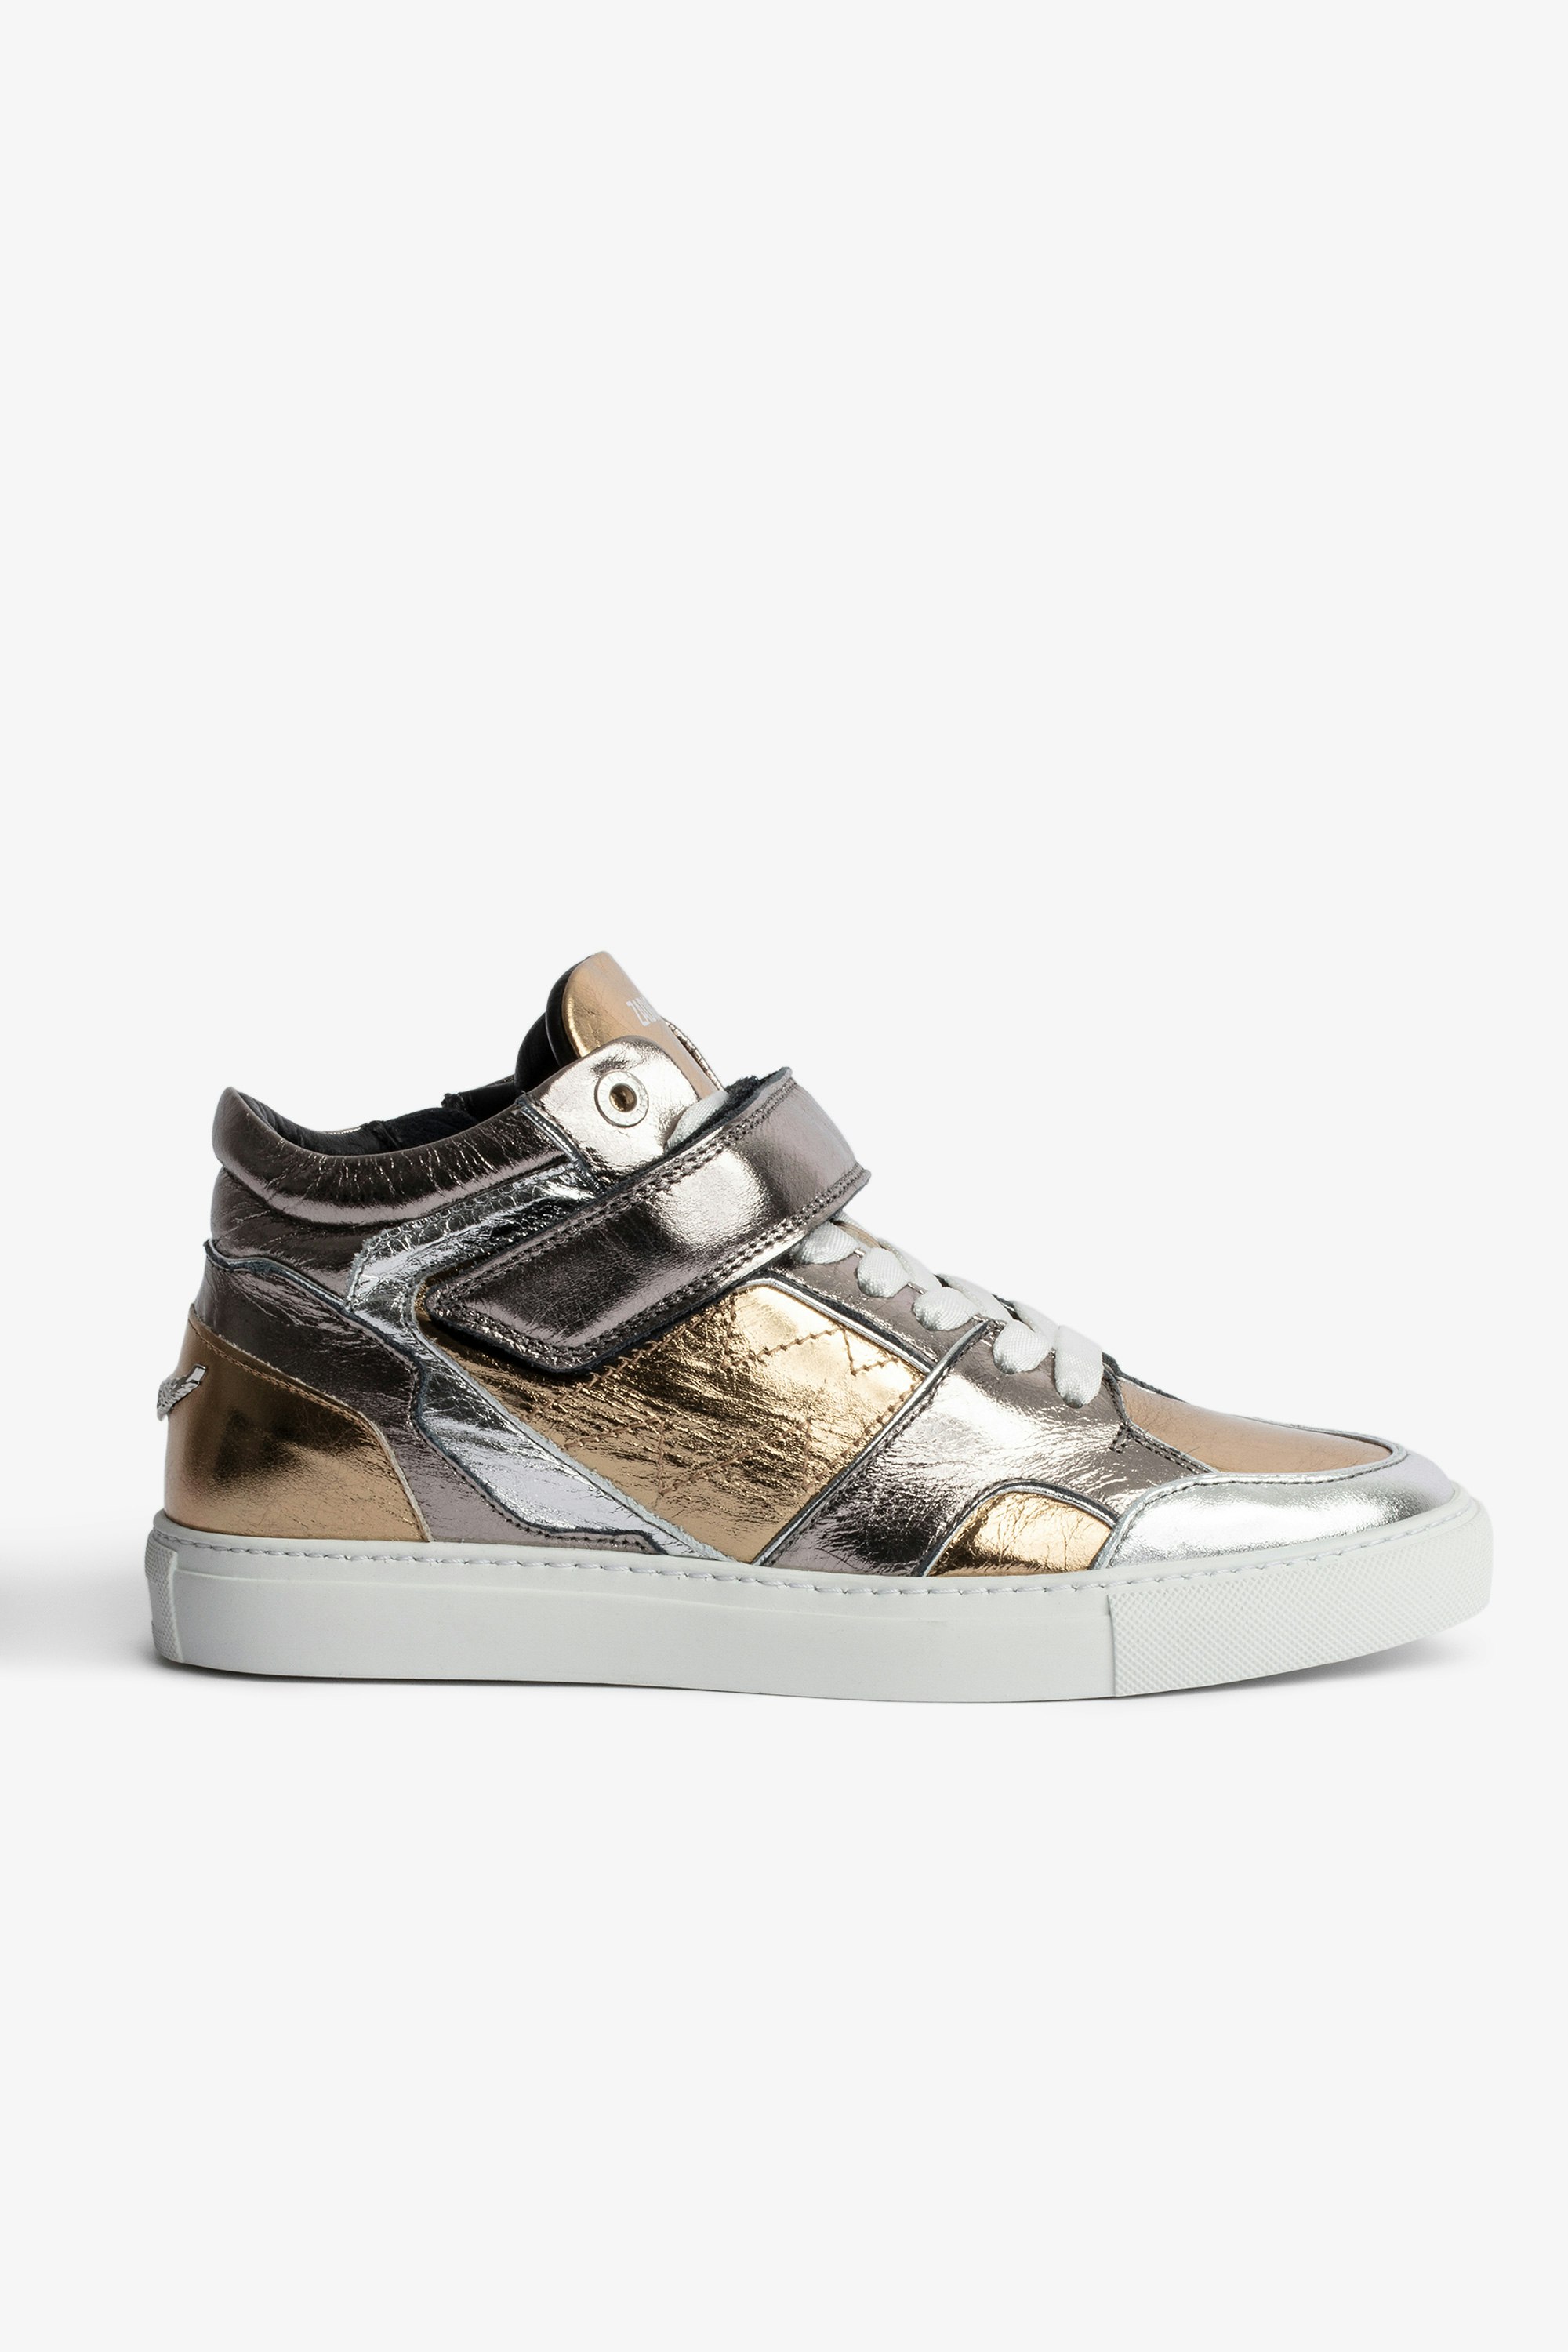 ZV1747 Mid Flash ビンテージ metal mix スニーカー Women’s mid-top sneakers in silver and gold metallic leather